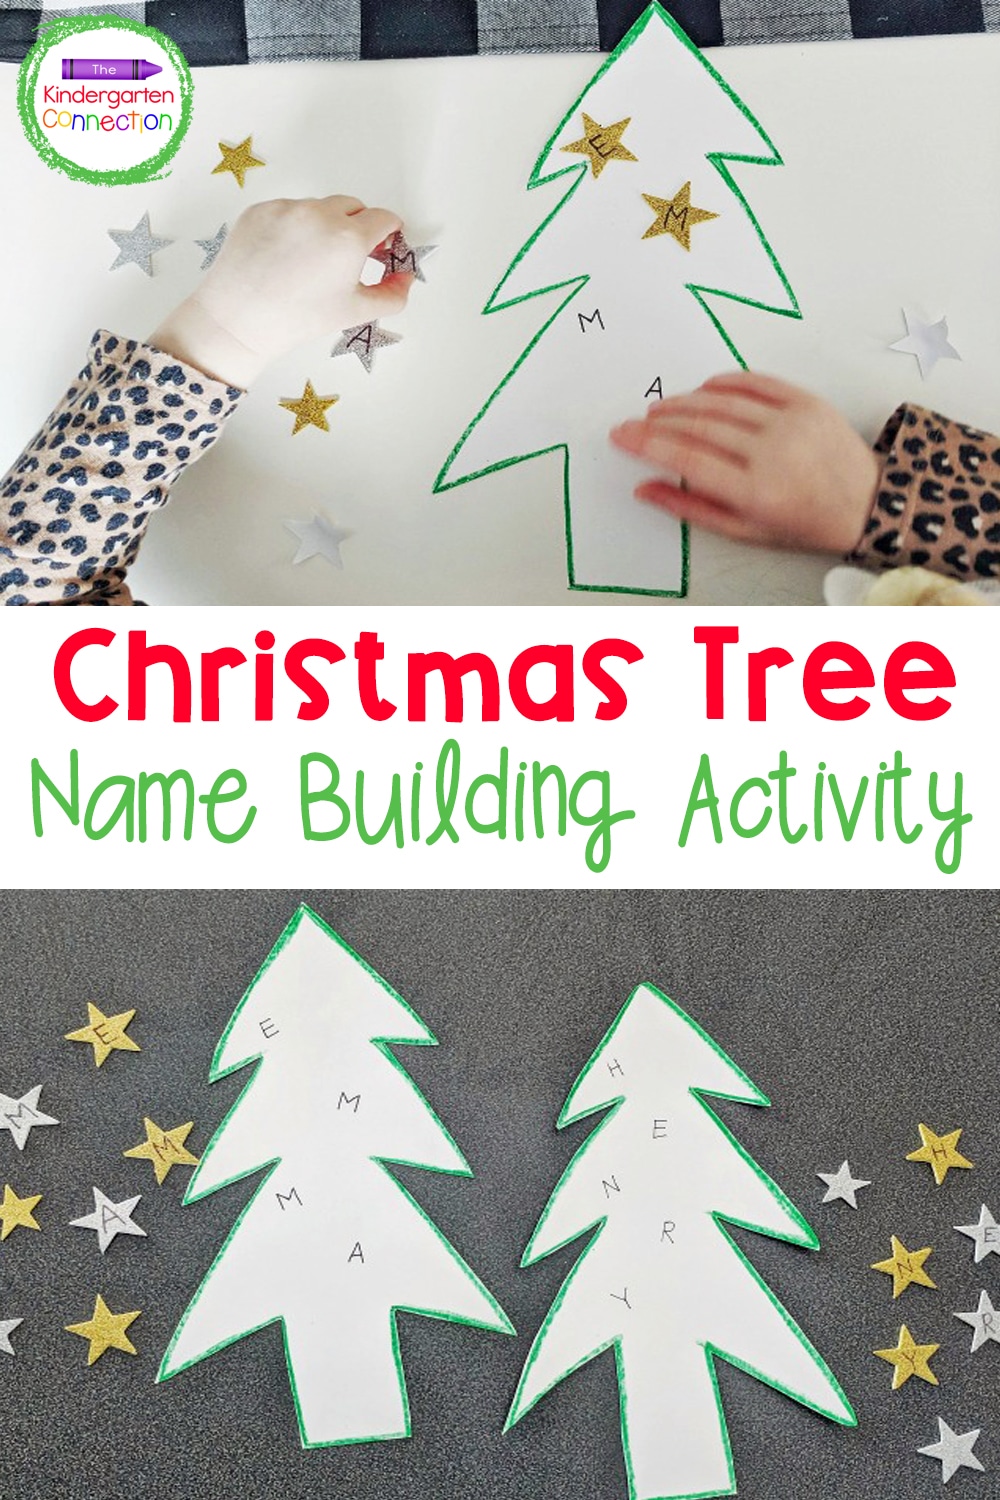 Find out how simple it is to create a Christmas Tree Name Building Activity this holiday season with supplies you already have on hand!